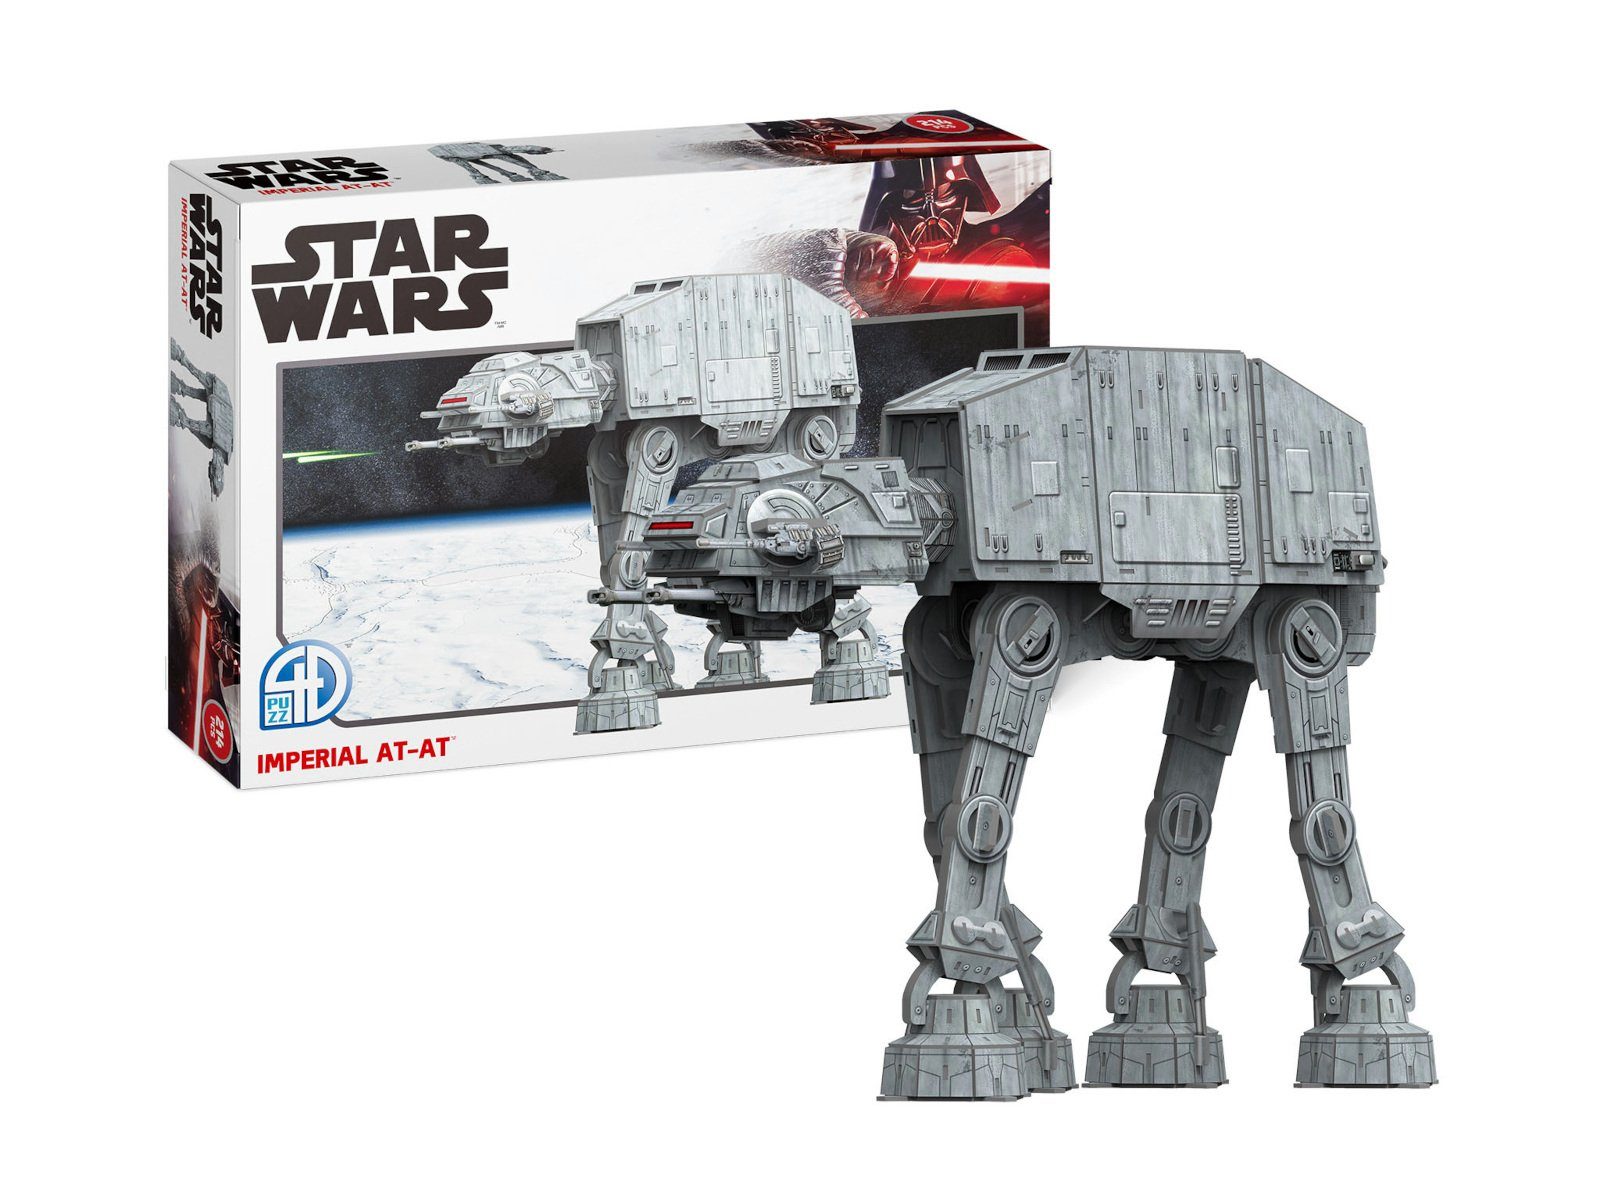 Revell® 3D-Puzzle 3D-Puzzle "Star Wars Imperial AT-AT" Set 214 Teile ab 10 Jahren, 214 Puzzleteile